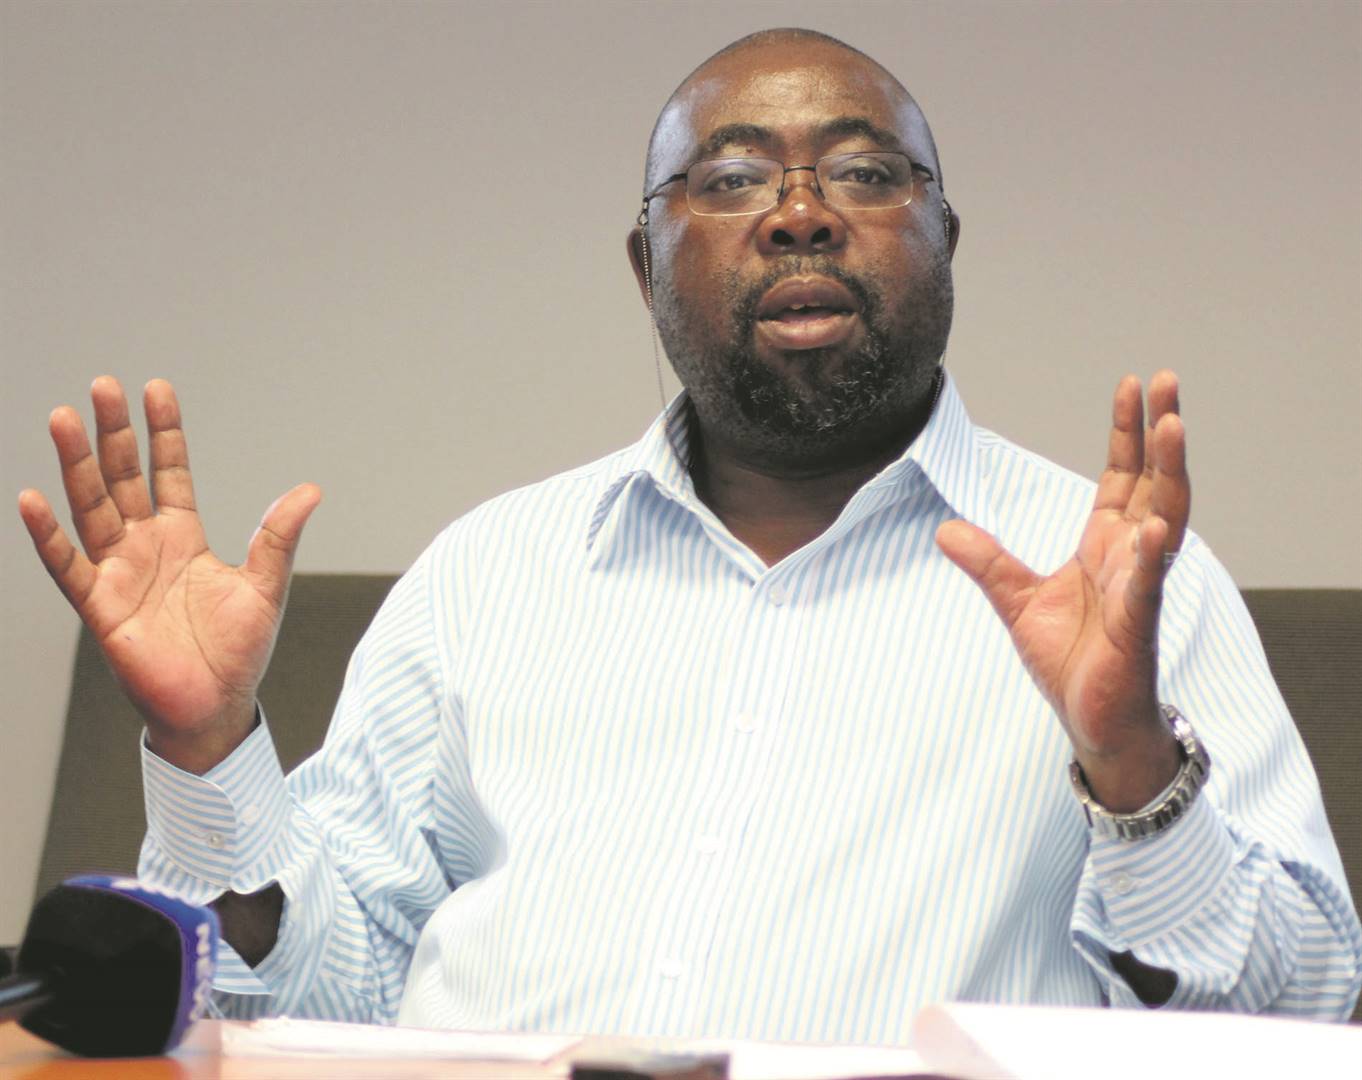 Mthunzi Mdwaba publicly accused Thulas Nxesi and other high-ranking government officials of soliciting a bribe